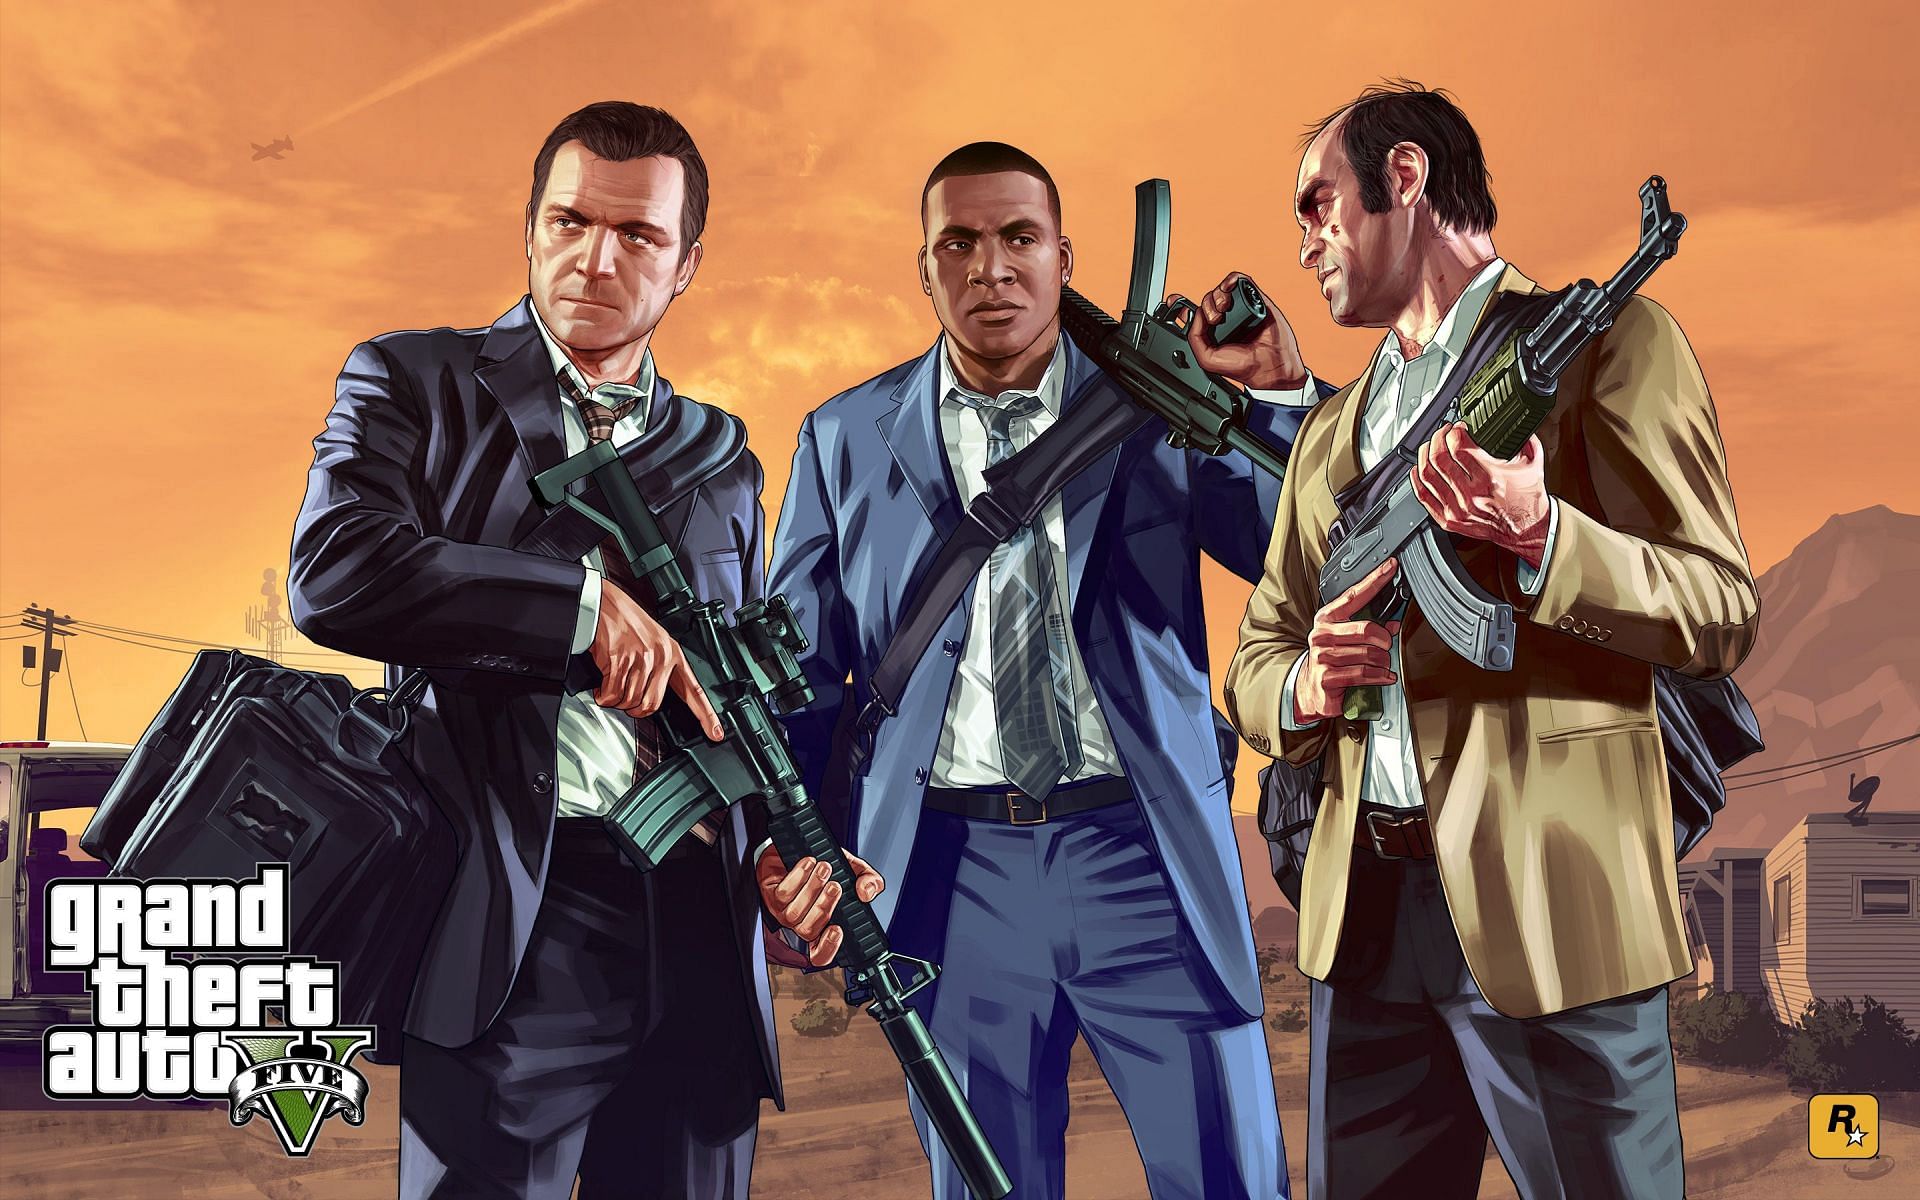 Grand Theft Auto V is one of the best-selling video games of all time (Image via Rockstar Games)